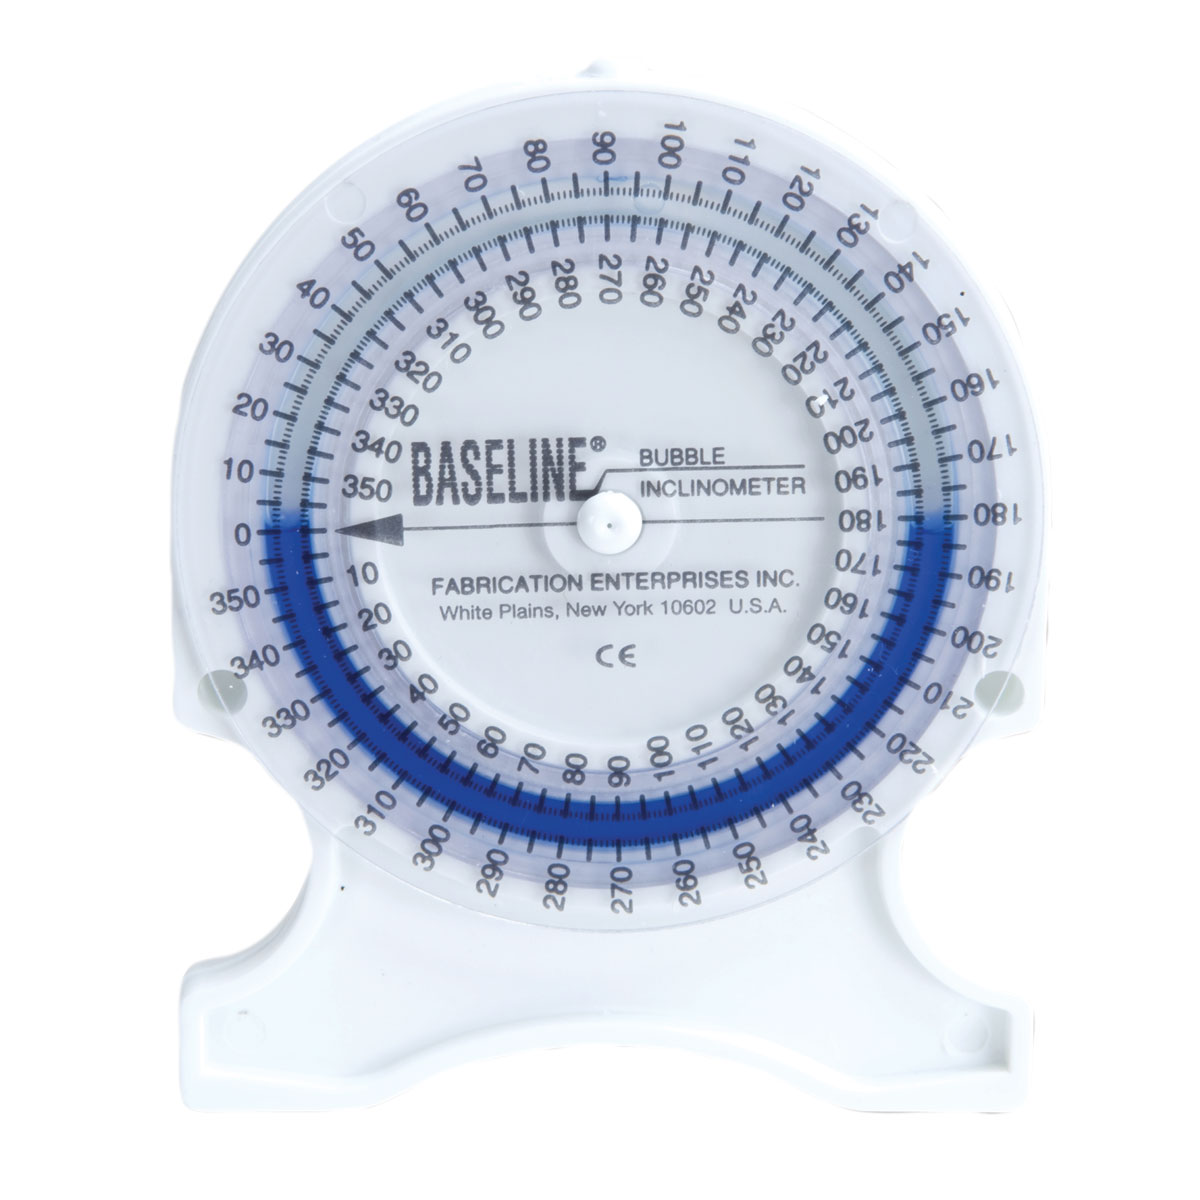 Inclinometers Baseline Bubble Inclinometer - 1005901 - W50178 - Baseline - 12-1056 -  Plastic Goniometers | Stainless Steel Goniometer | Inclinometers |  Goniometer